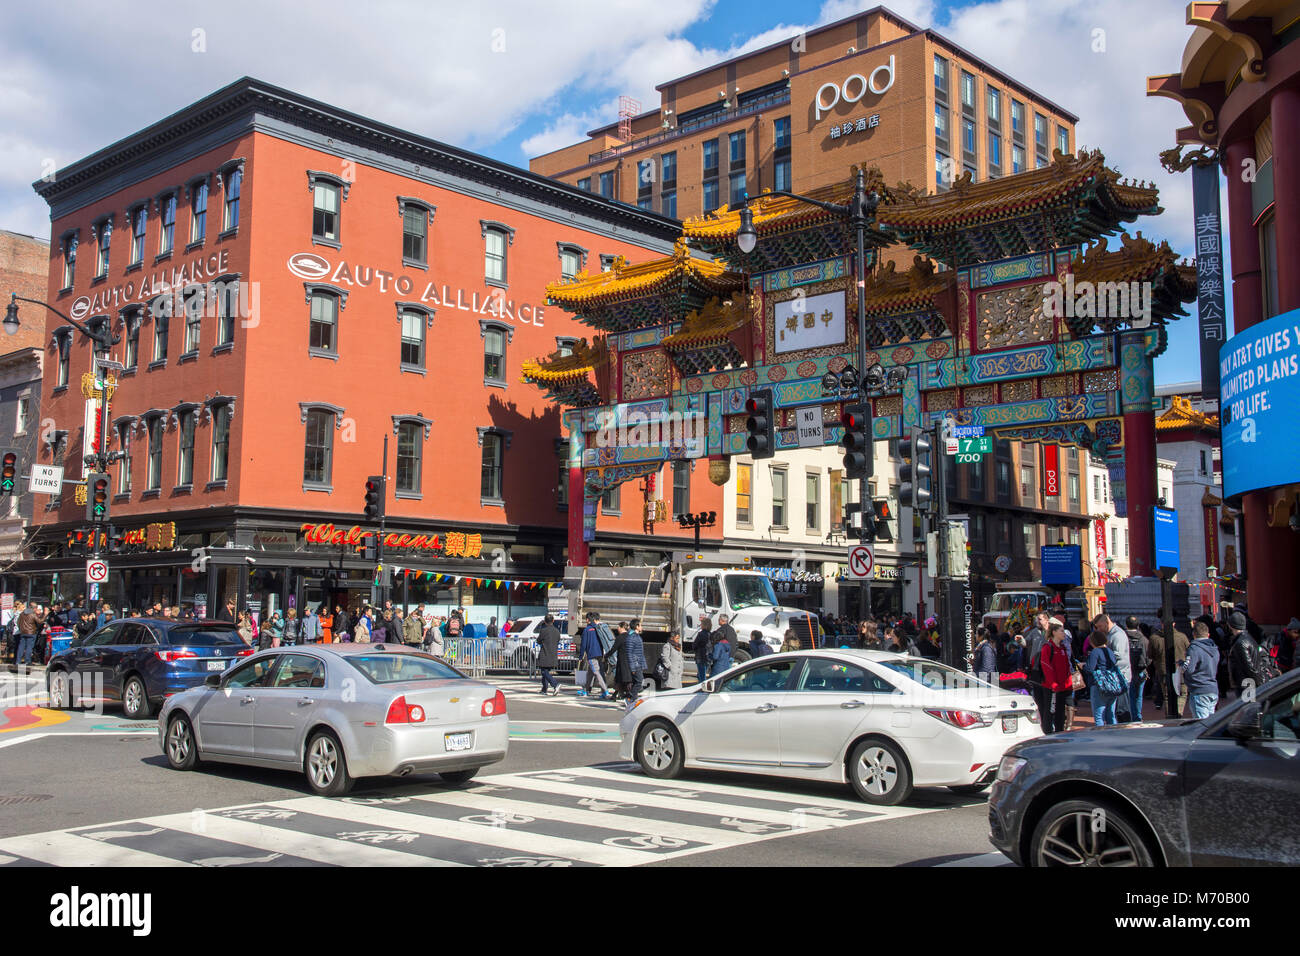 Friendship Archway, built in 1986, defines the neighborhood as Chinatown, Washingtion DC. Newly restored 19th century building at left houses small bu Stock Photo